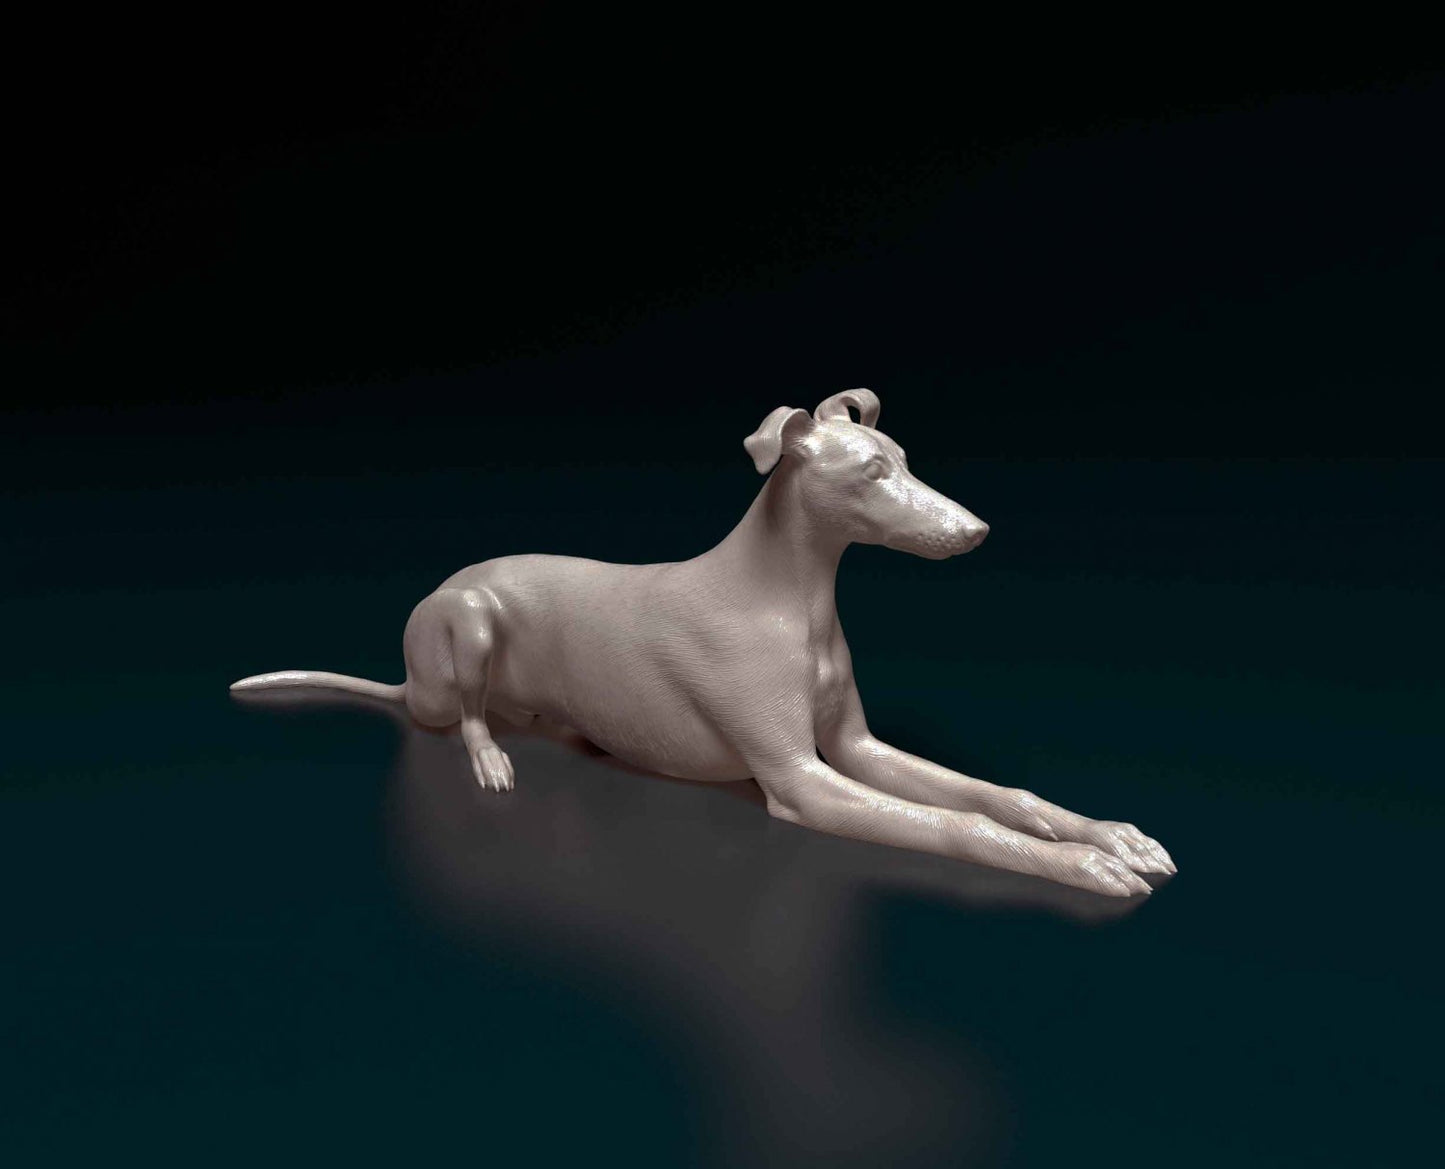 saluki x greyhound cross dog artist resin - white resin ready to prep / paint ALL SCALES